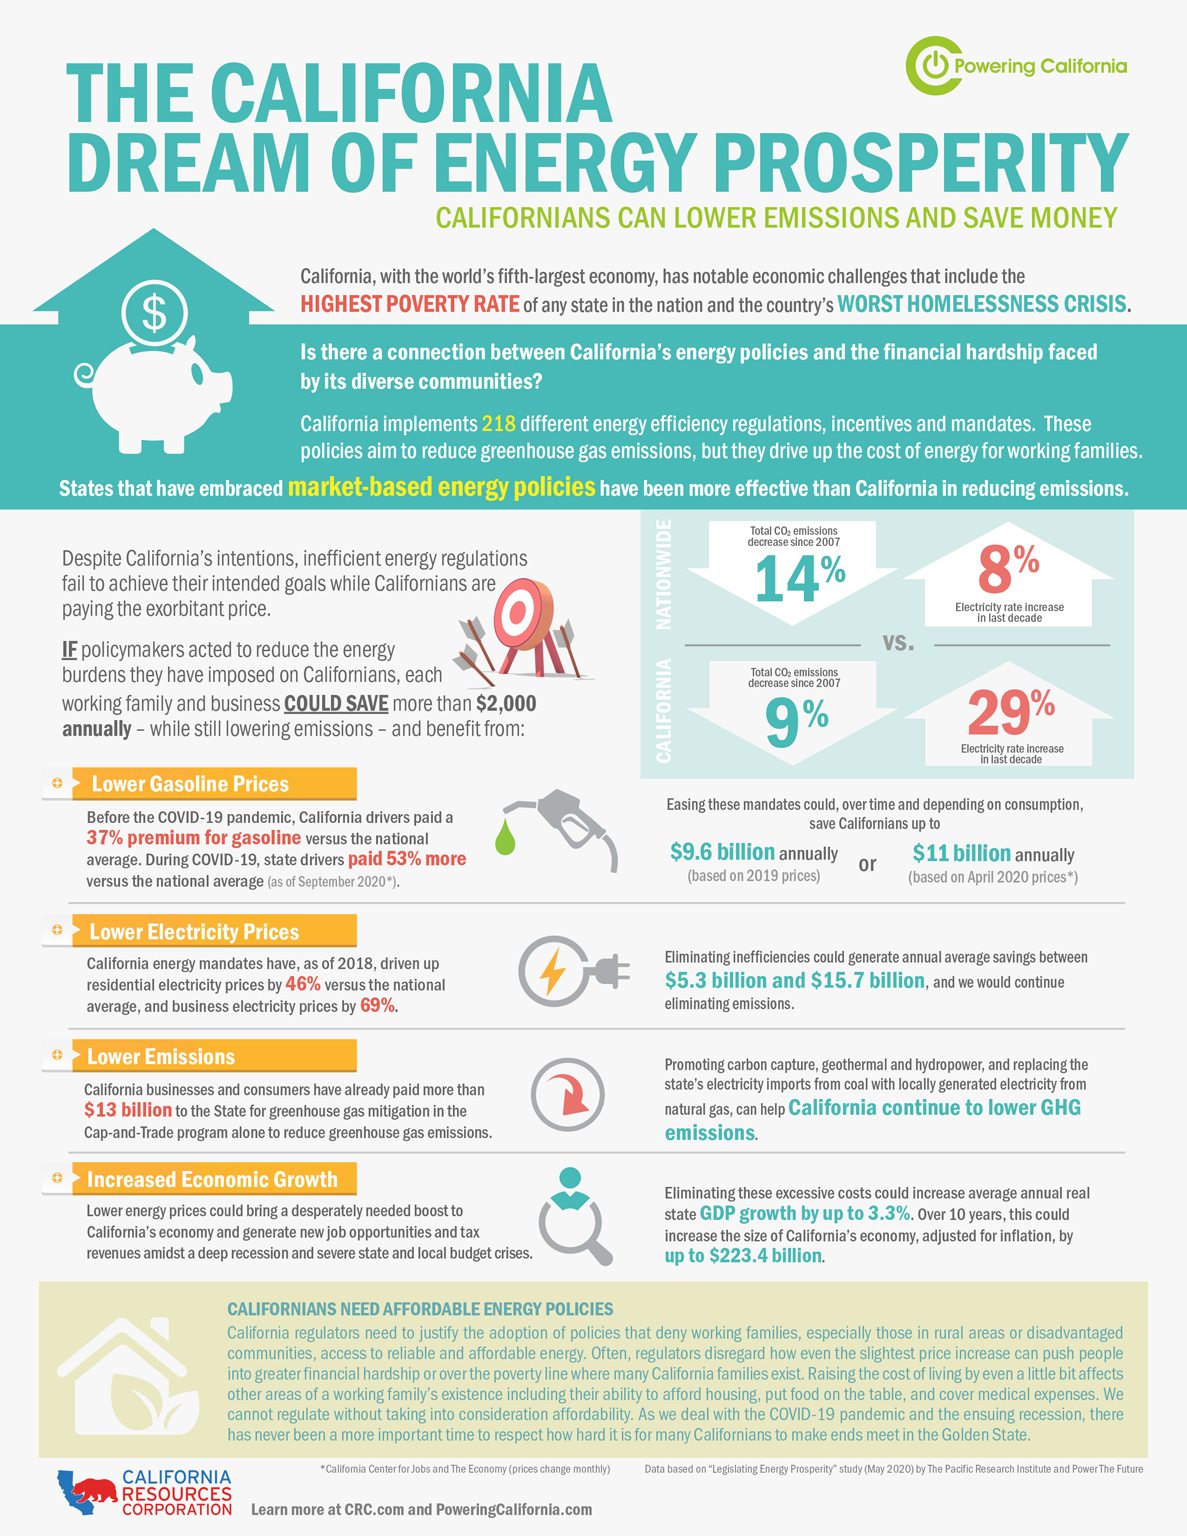 The California Dream of Energy Prosperity infographic shows how Californians can reduce GHG emissions and save money at the same time.